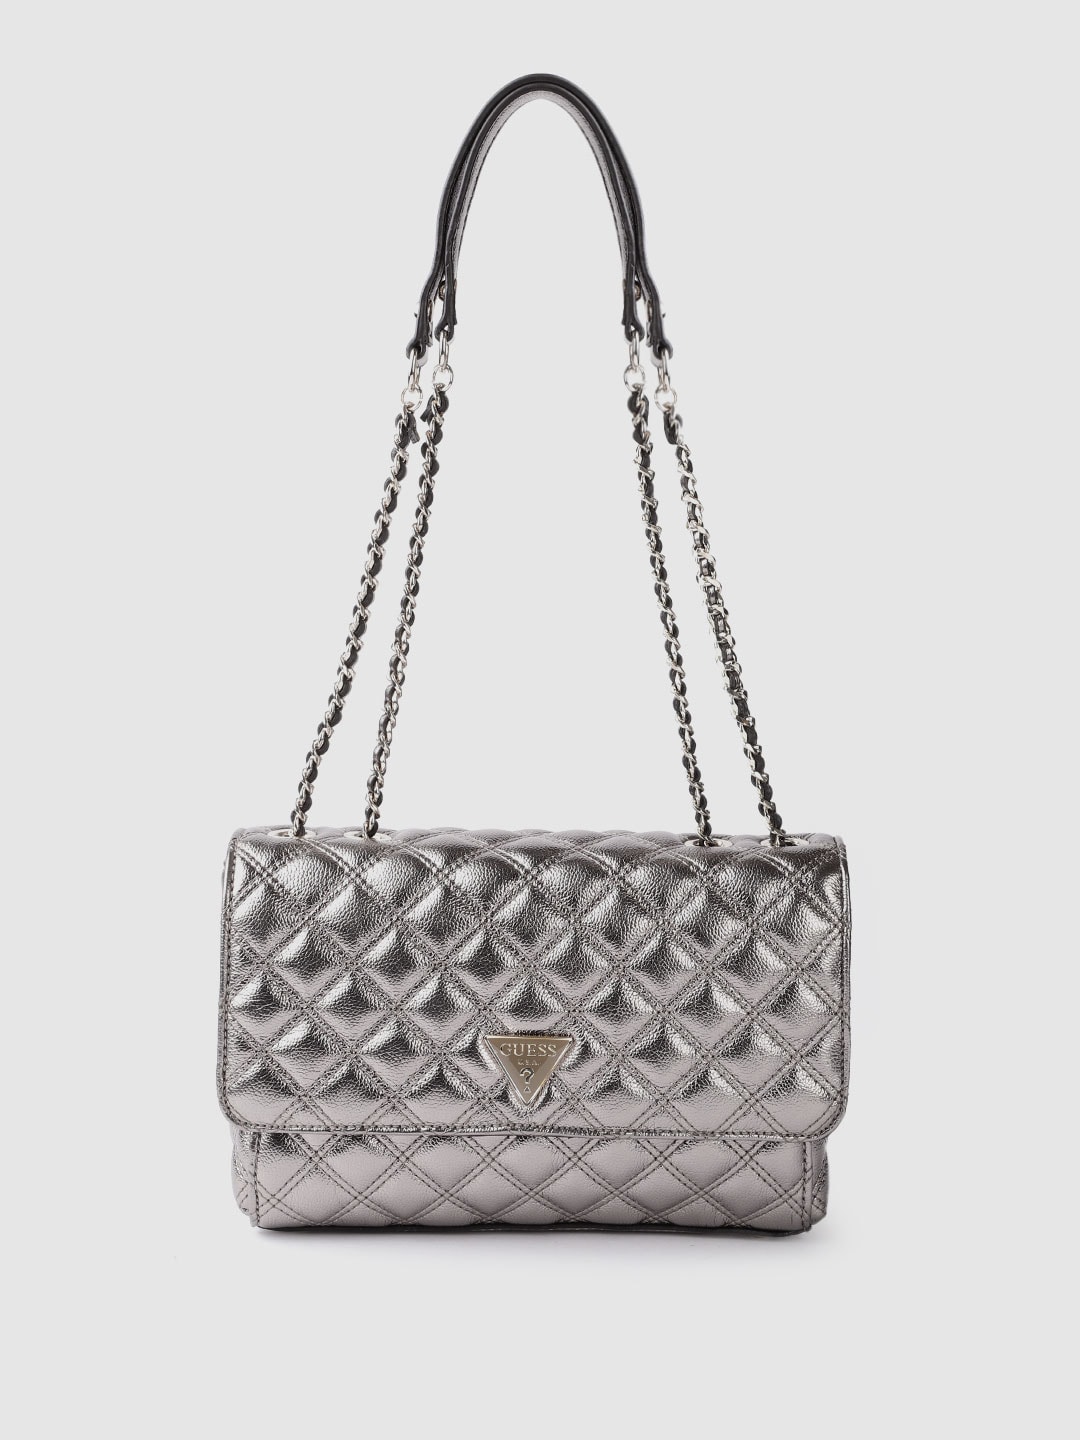 GUESS Silver-Toned Quilted Shoulder Bag Price in India